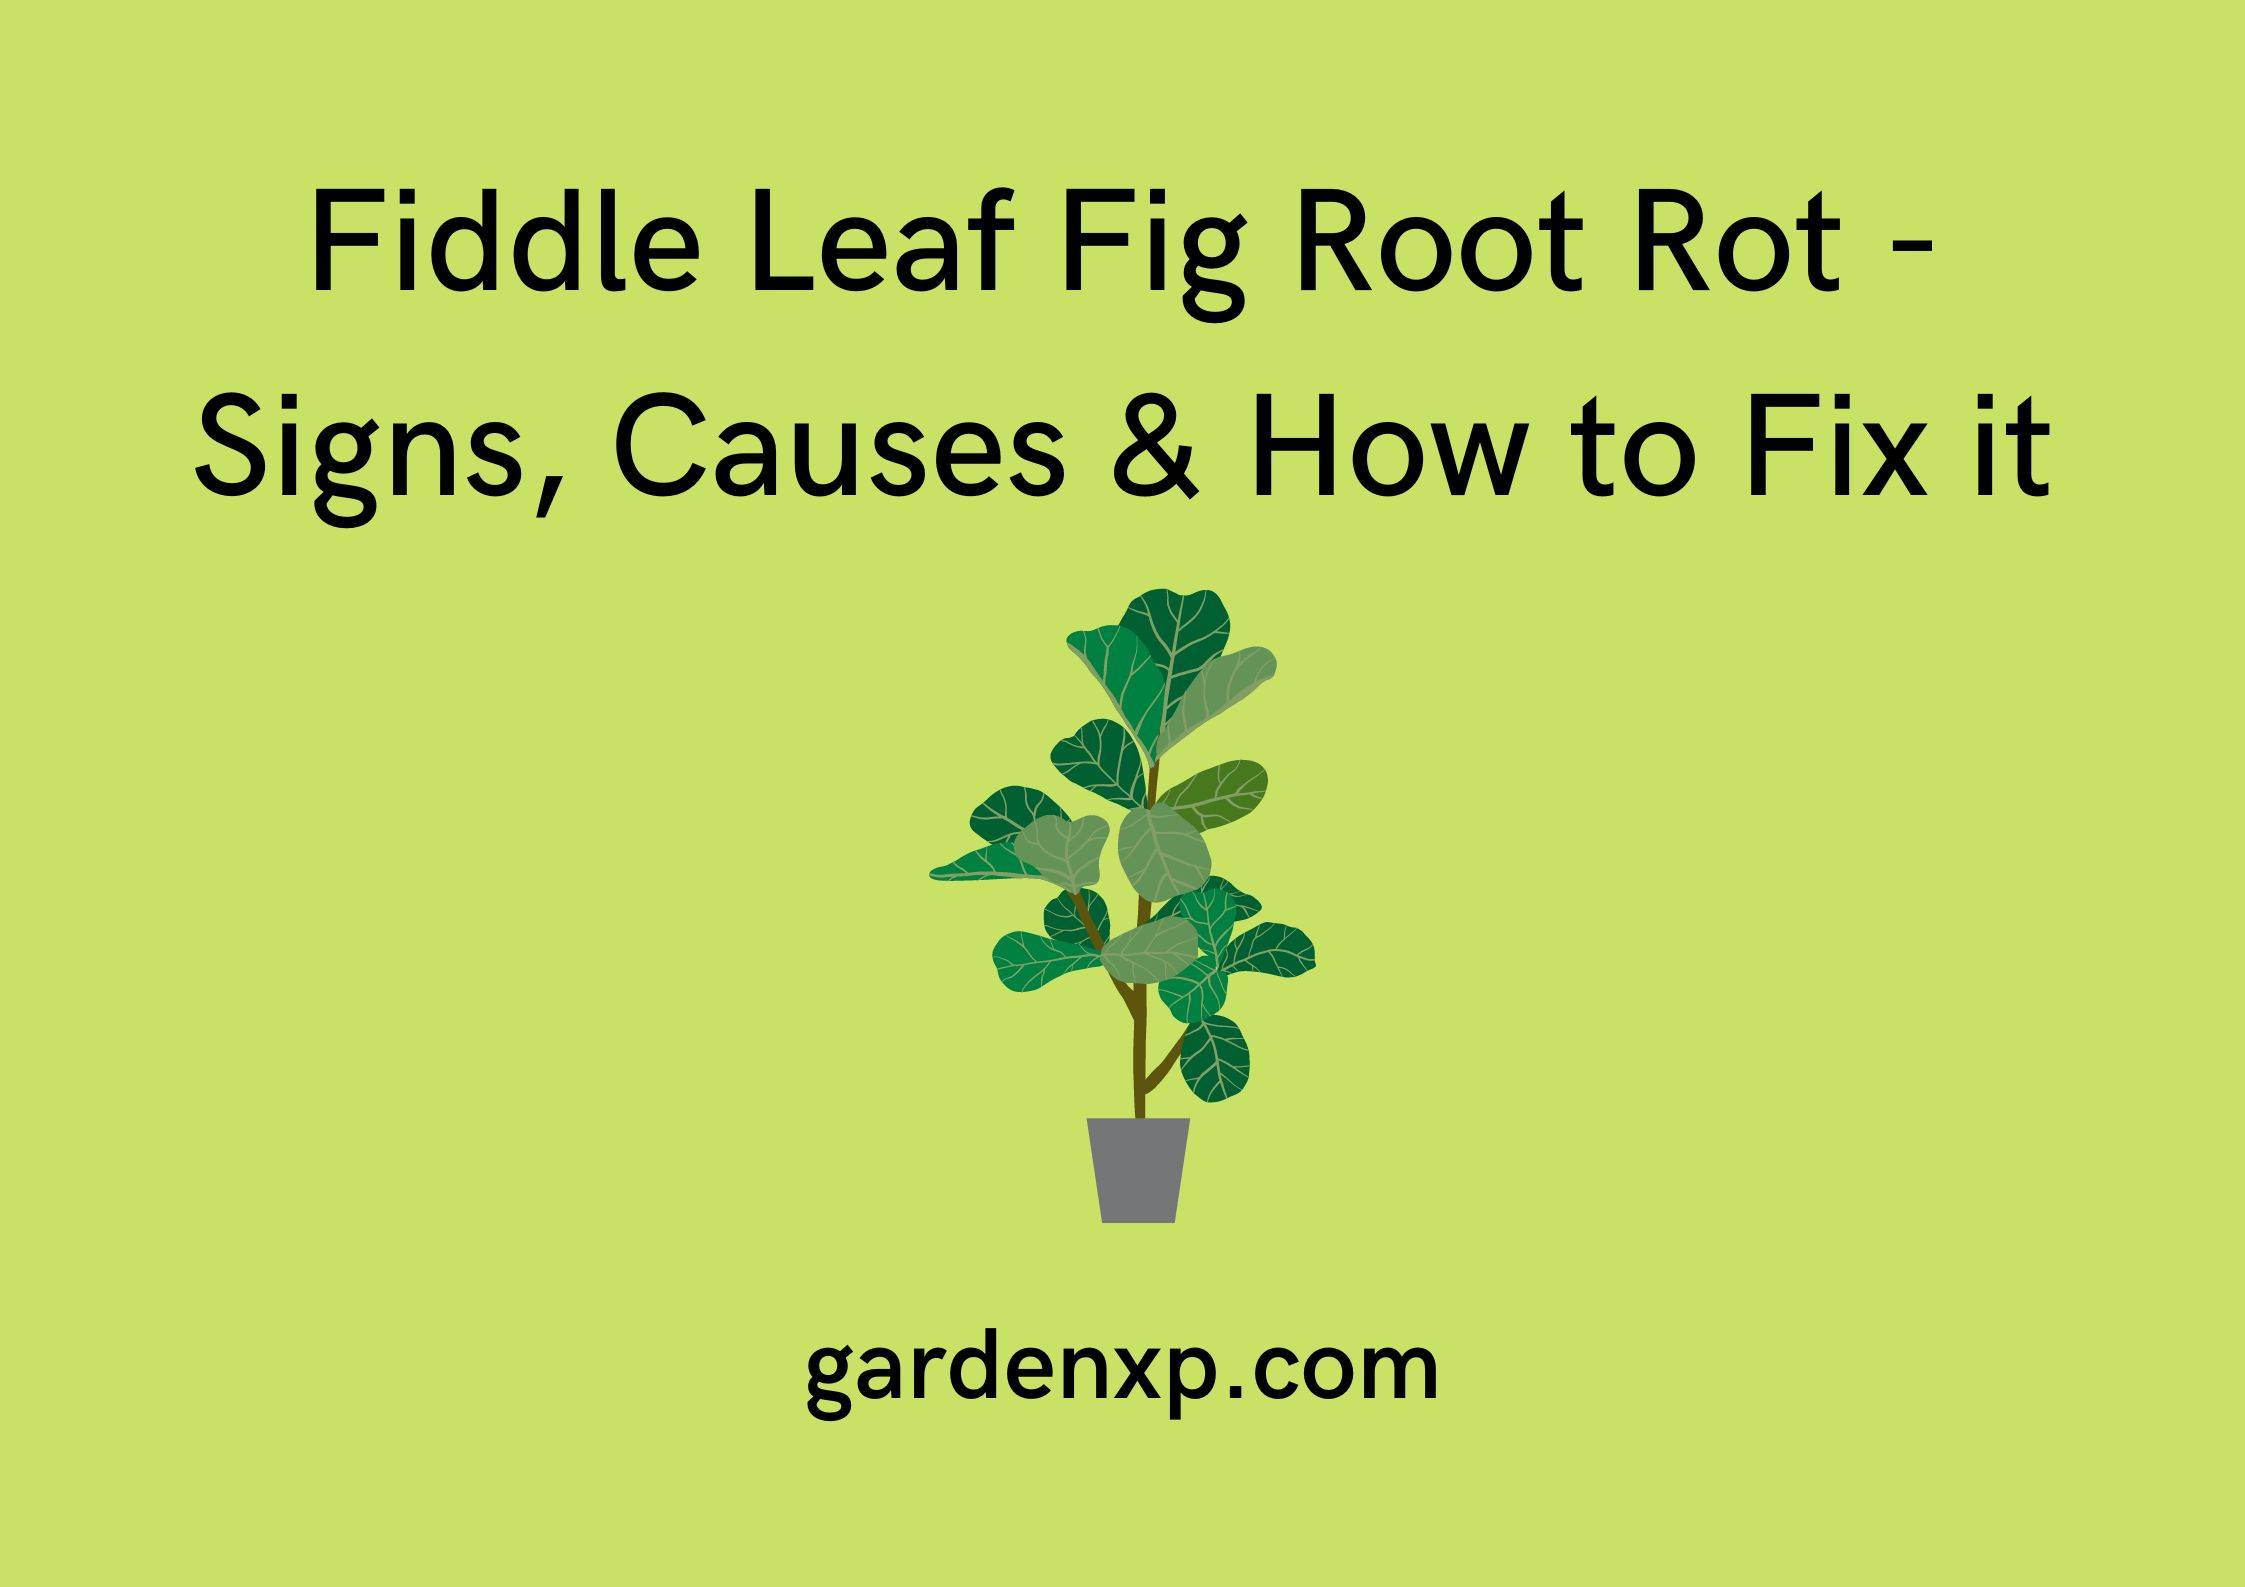 Fiddle Leaf Fig Root Rot - Signs, Causes & How to Fix it